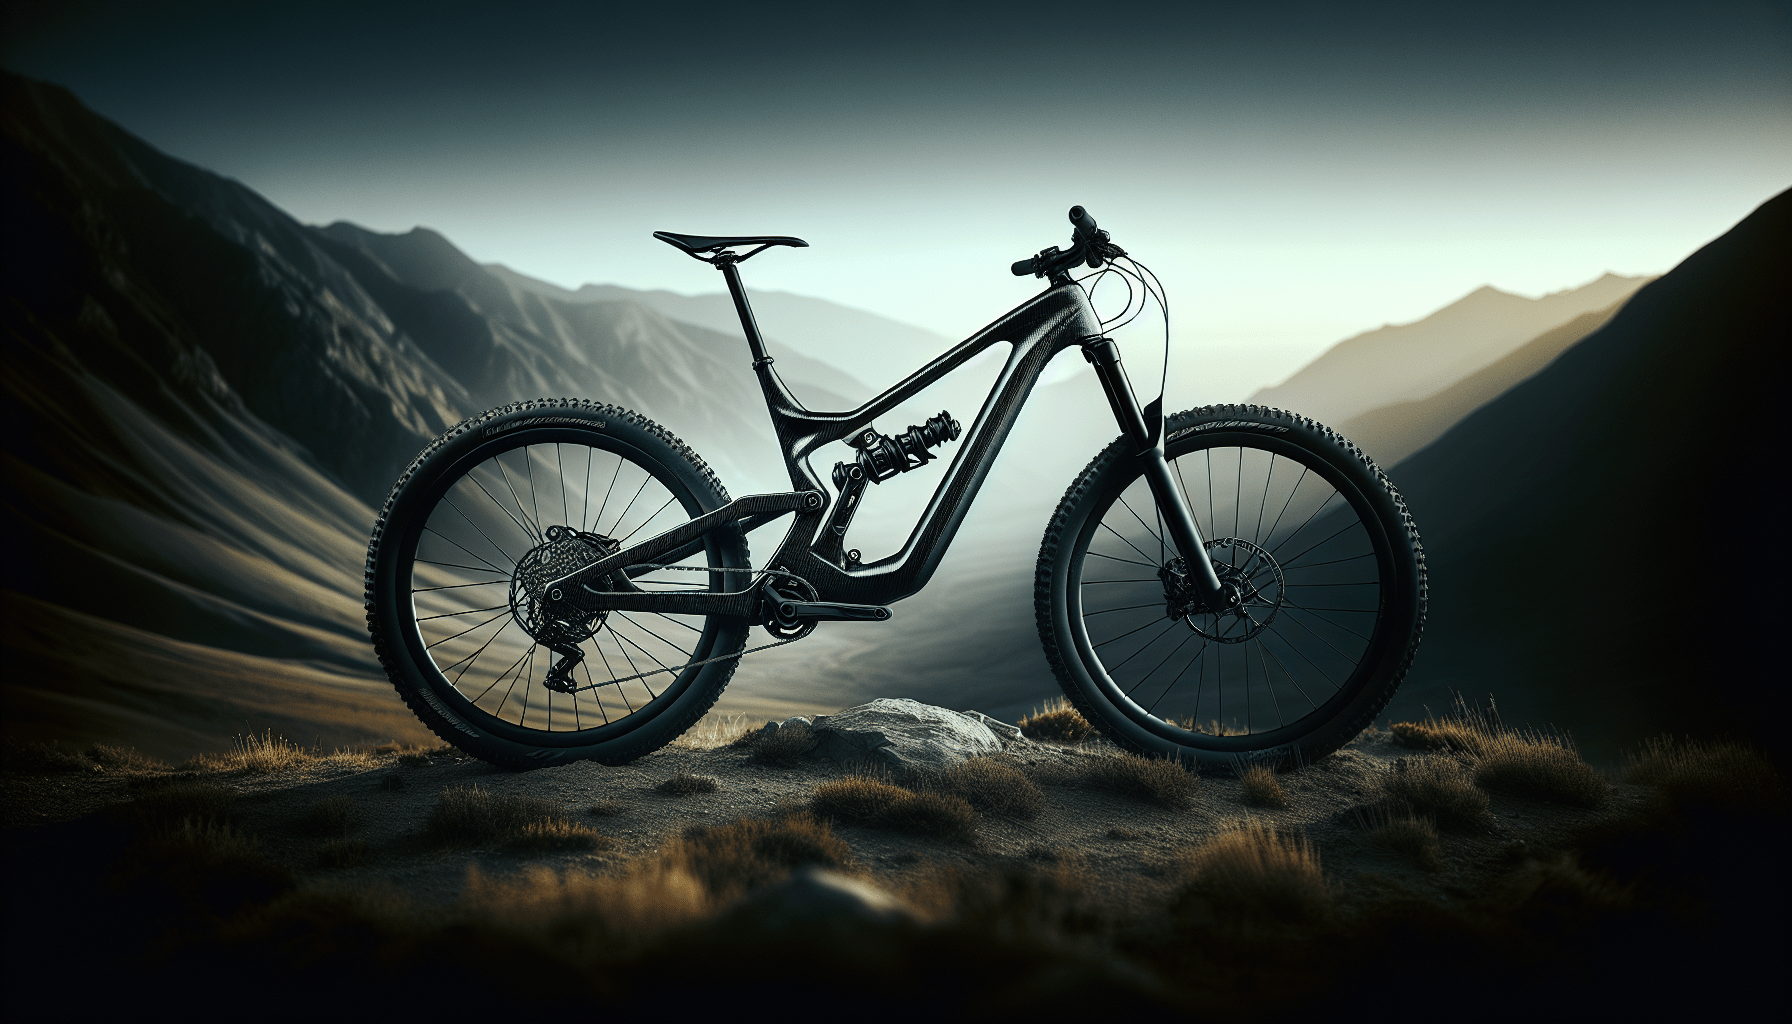 Fuel Your Passion For Off-Roading With The Top 3 Carbon Off-Road Bikes!